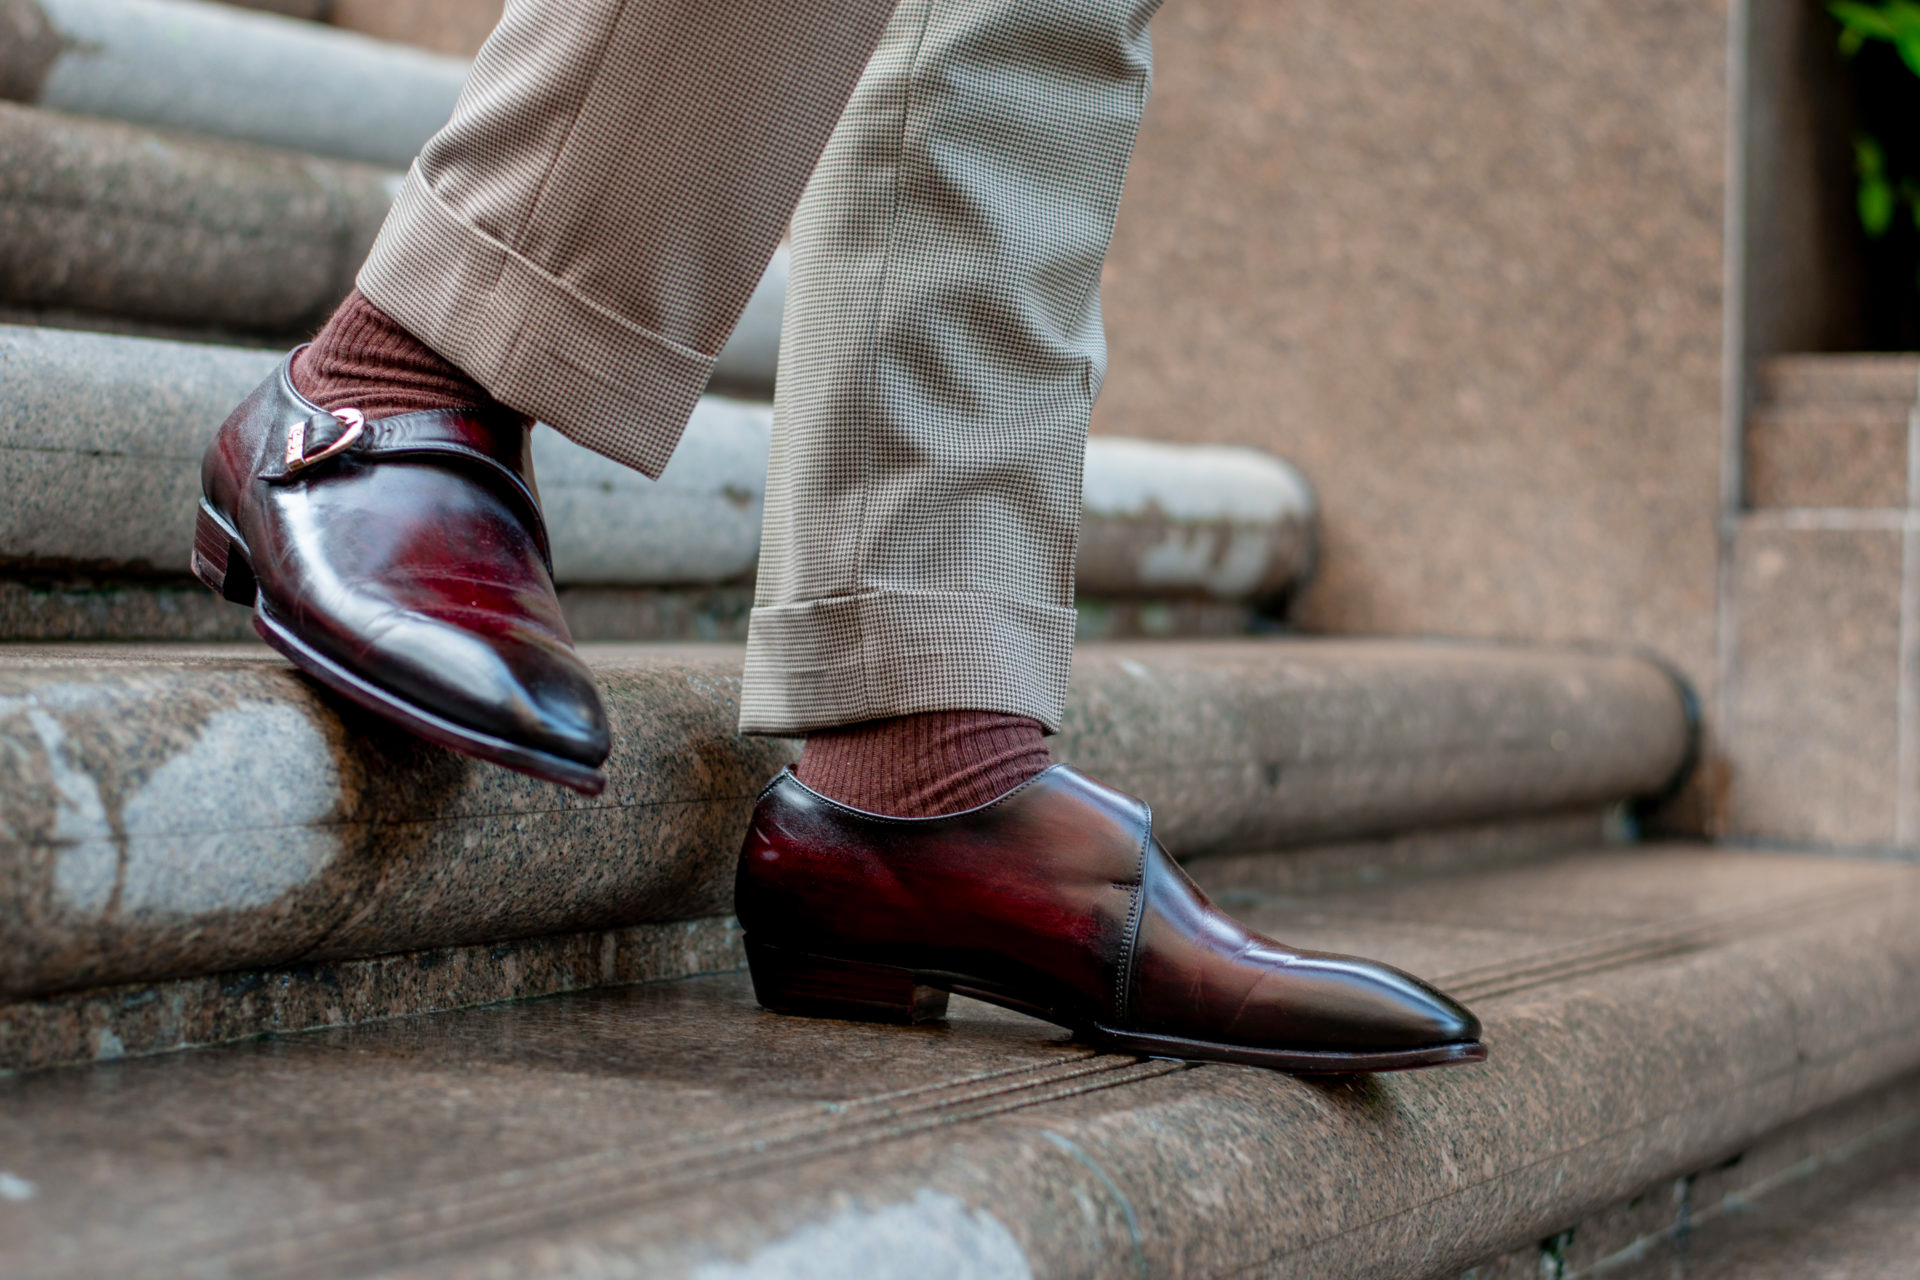 What Color Suit Pants To Wear With Burgundy Dress Shoes Suits Expert ...